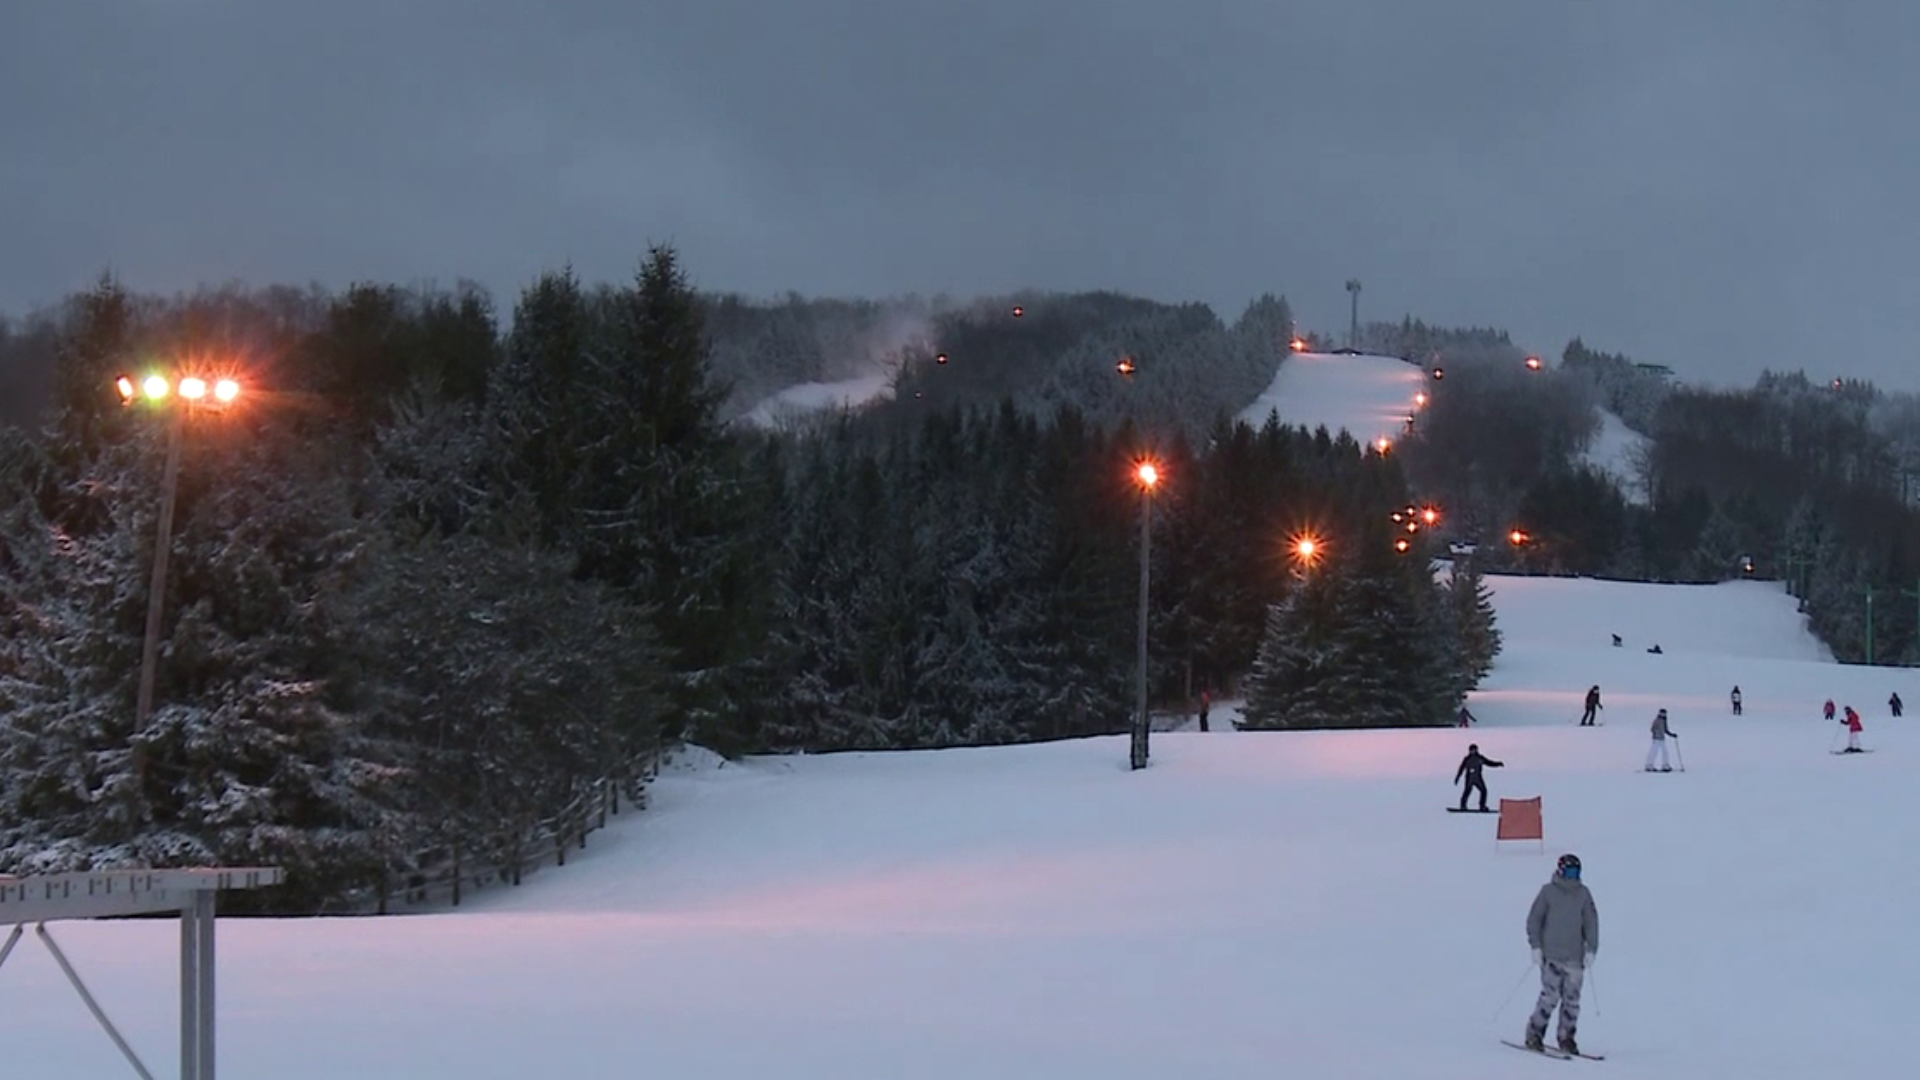 Skiers took advantage of the cold weather and fresh snow on Saturday.